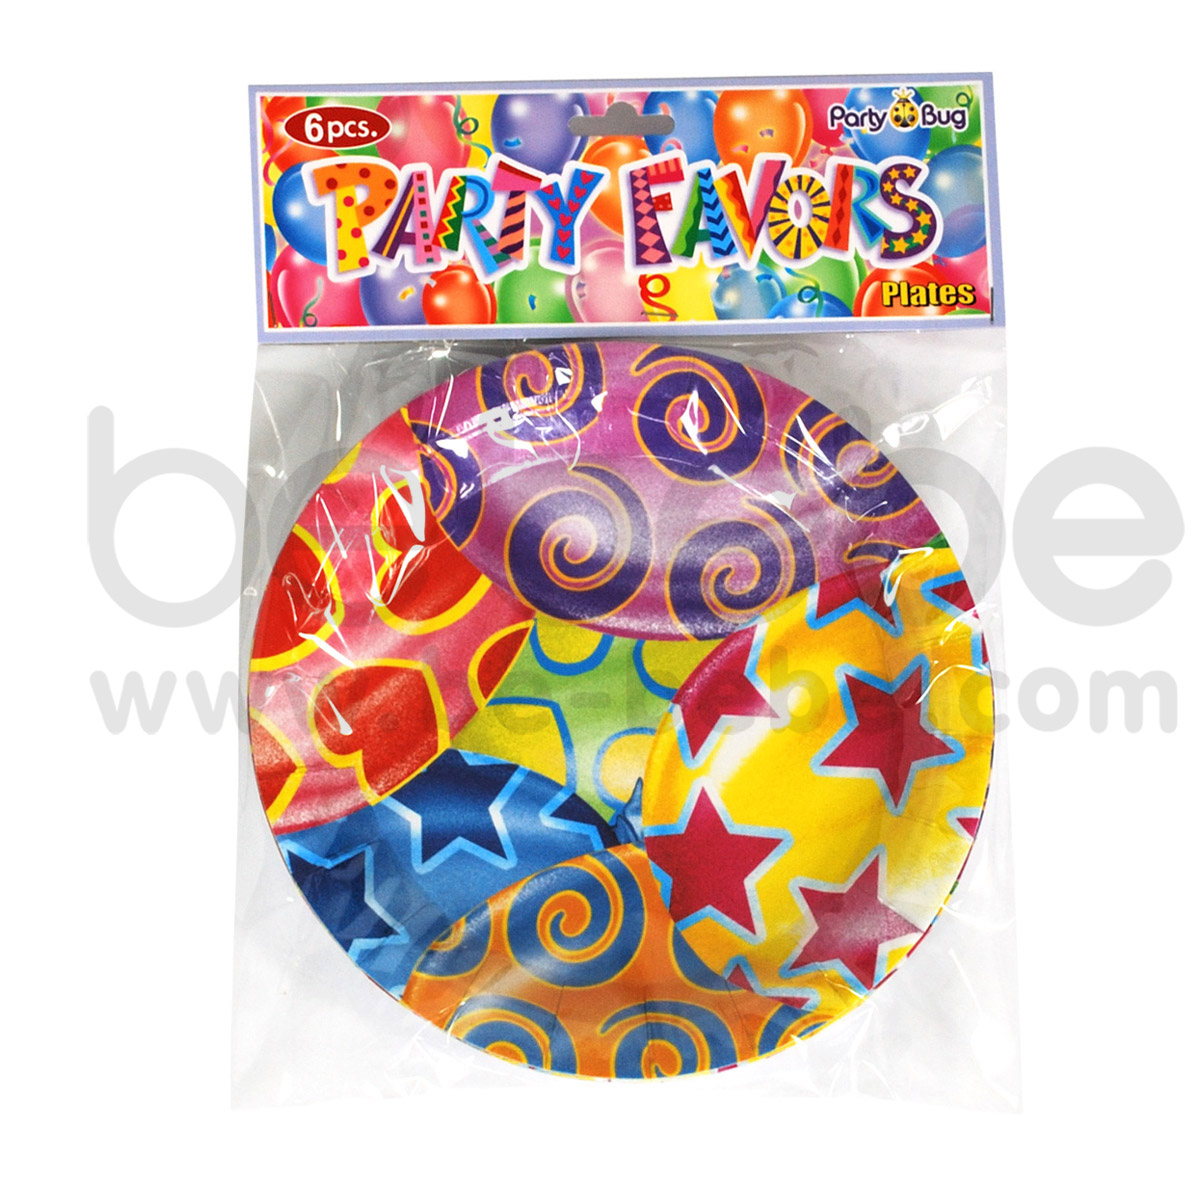 PARTY BUG : Paper plate 7 inch., 12 Packs